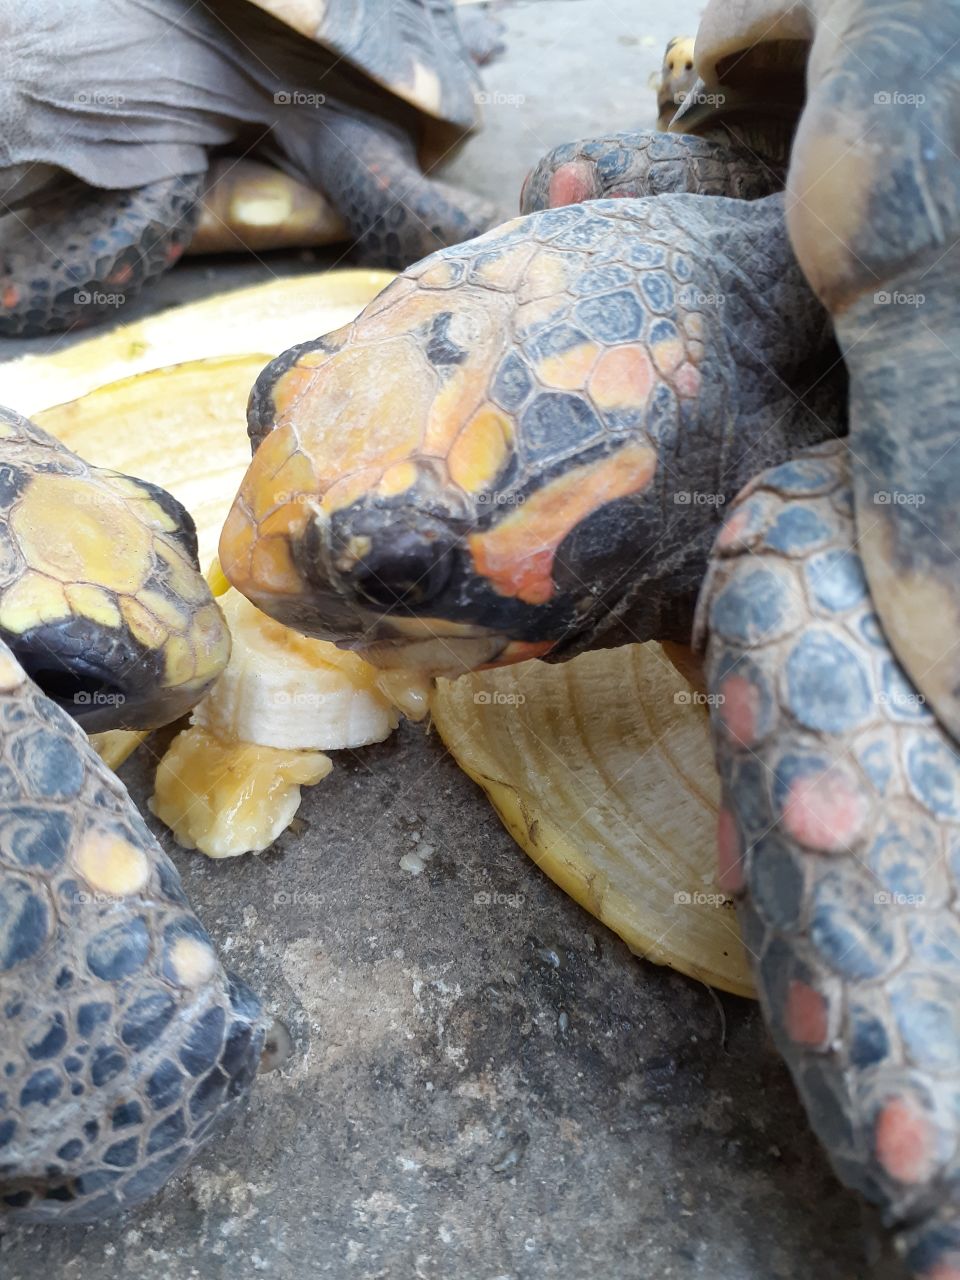 Male and female tortoises sharing a piece of banana.